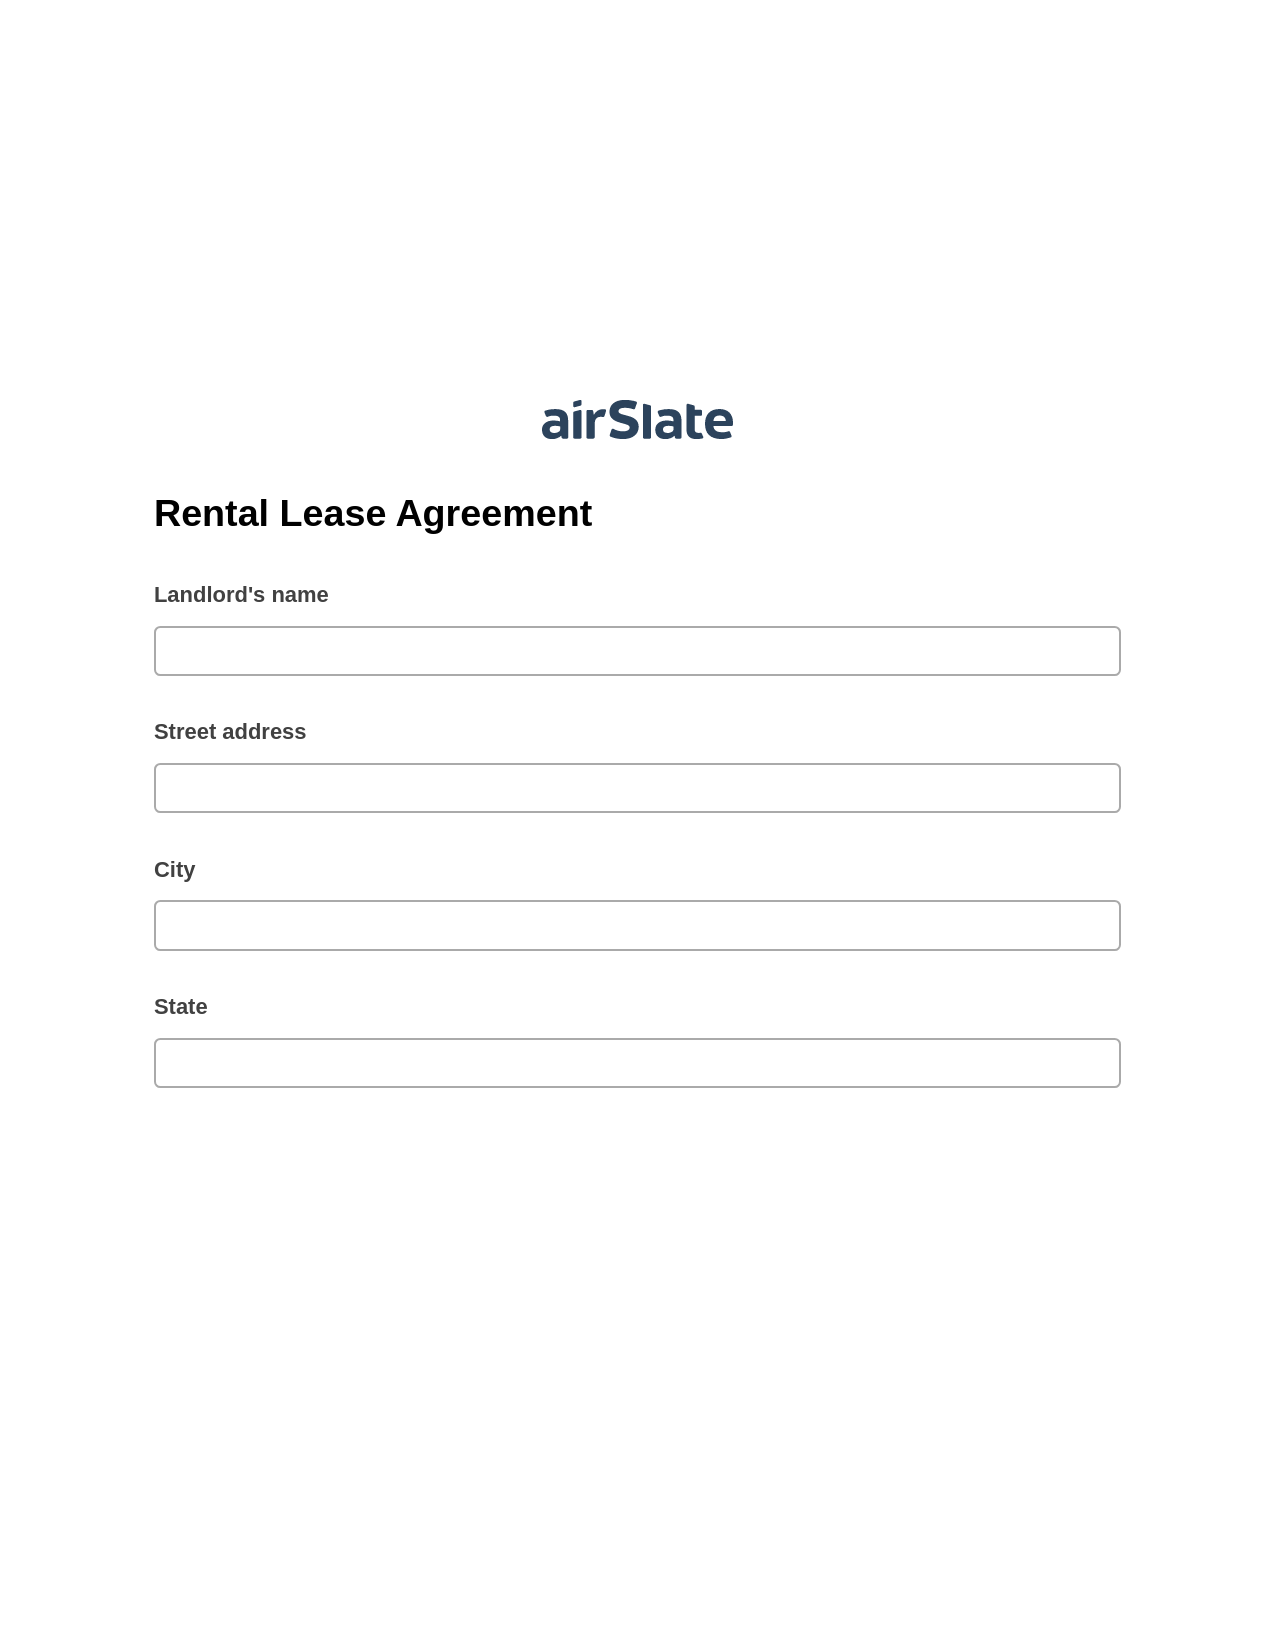 Rental Lease Agreement Pre-fill Slate from MS Dynamics 365 Records Bot, Create QuickBooks invoice Bot, Text Message Notification Postfinish Bot